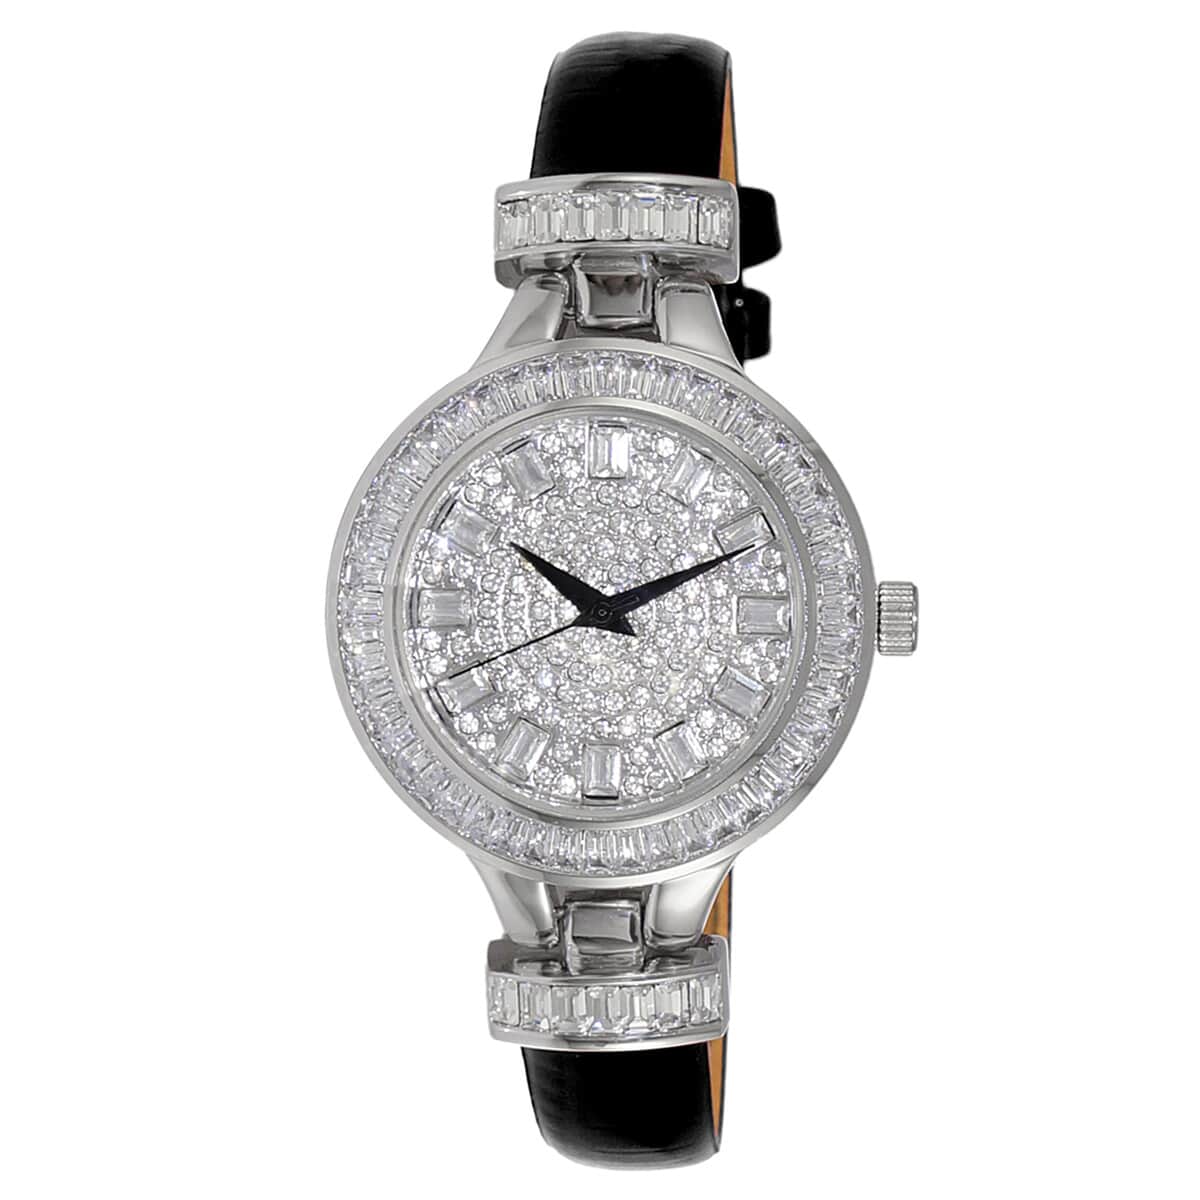 ADEE KAYE Austrian Crystal Japanese Movement Watch in Silvertone and Black Leather Strap (33 mm) image number 0